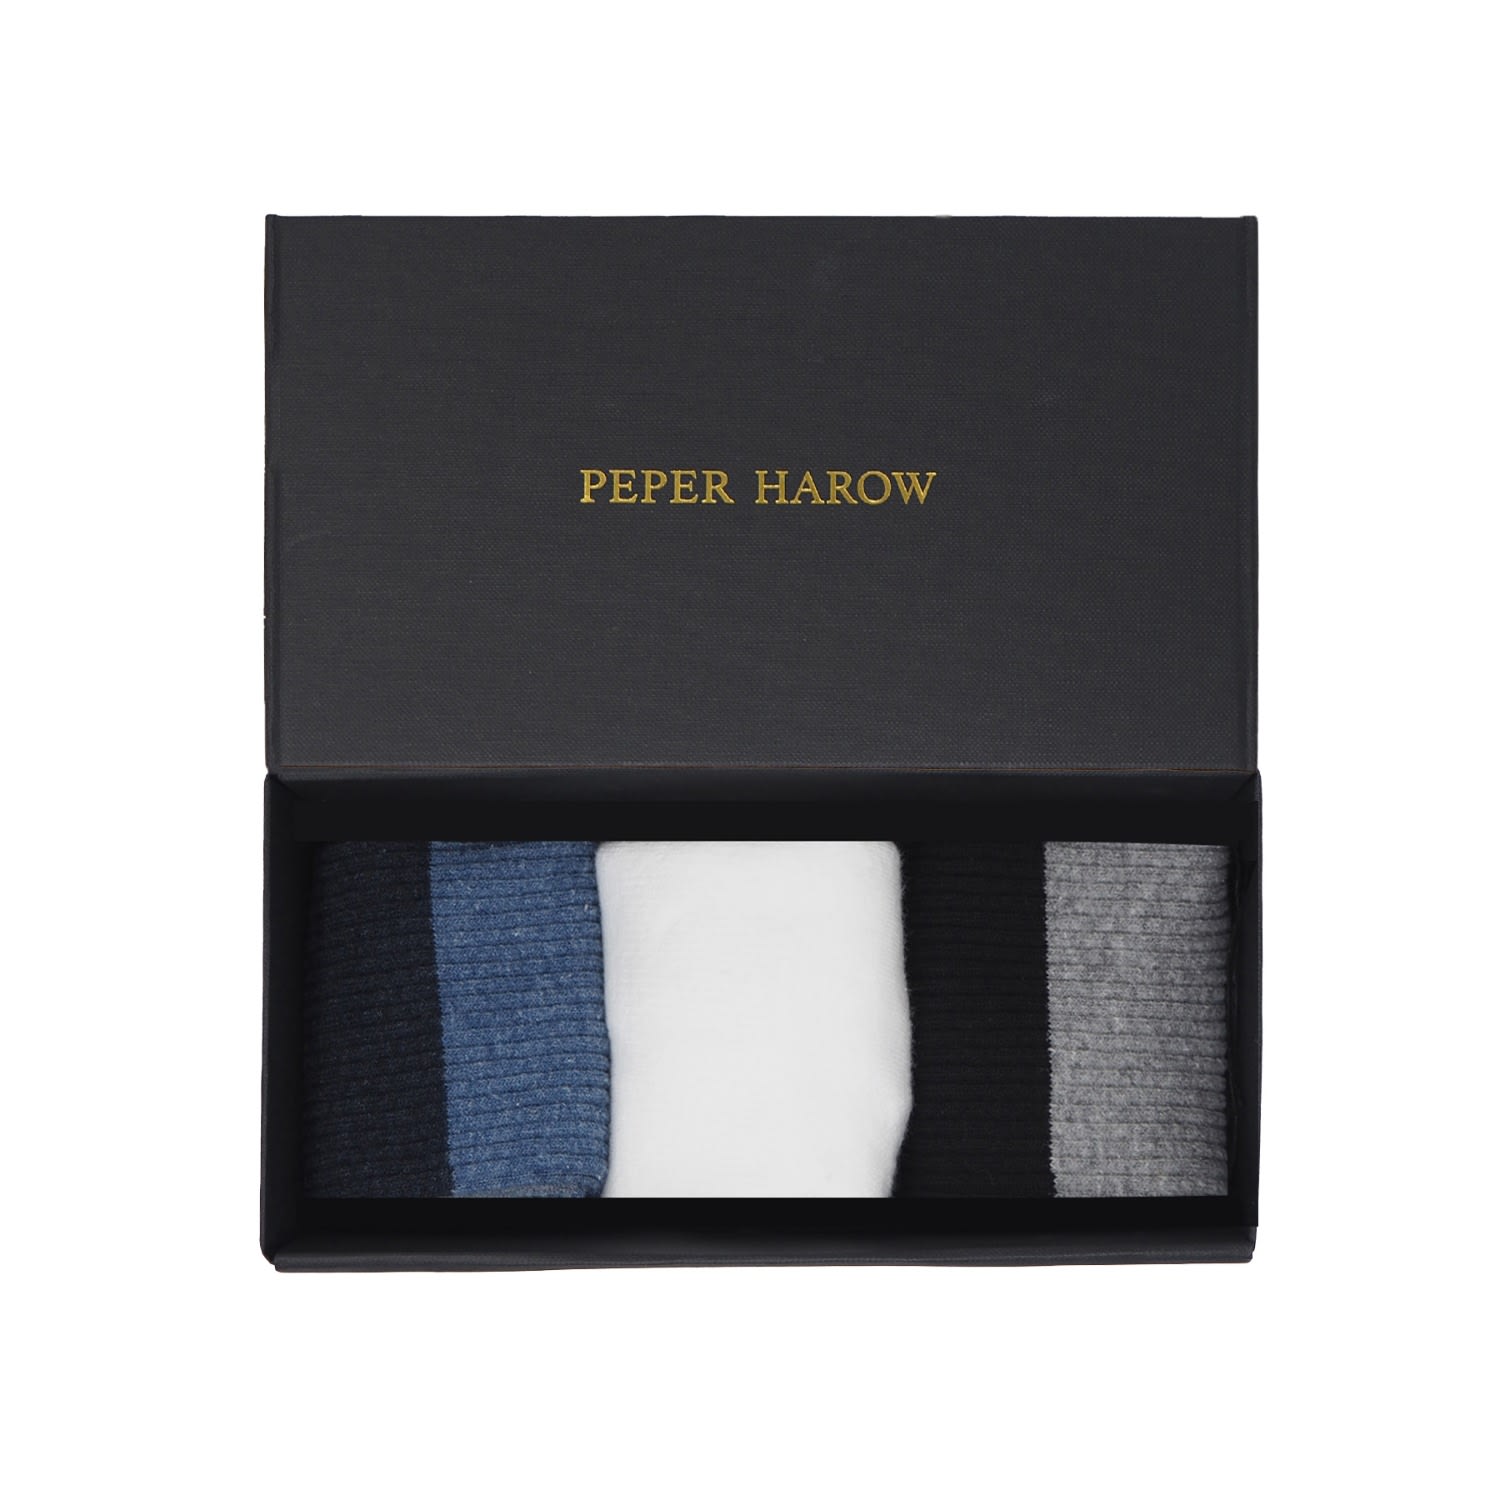 Wellness Men’s Gift Box One Size Peper Harow - Made in England